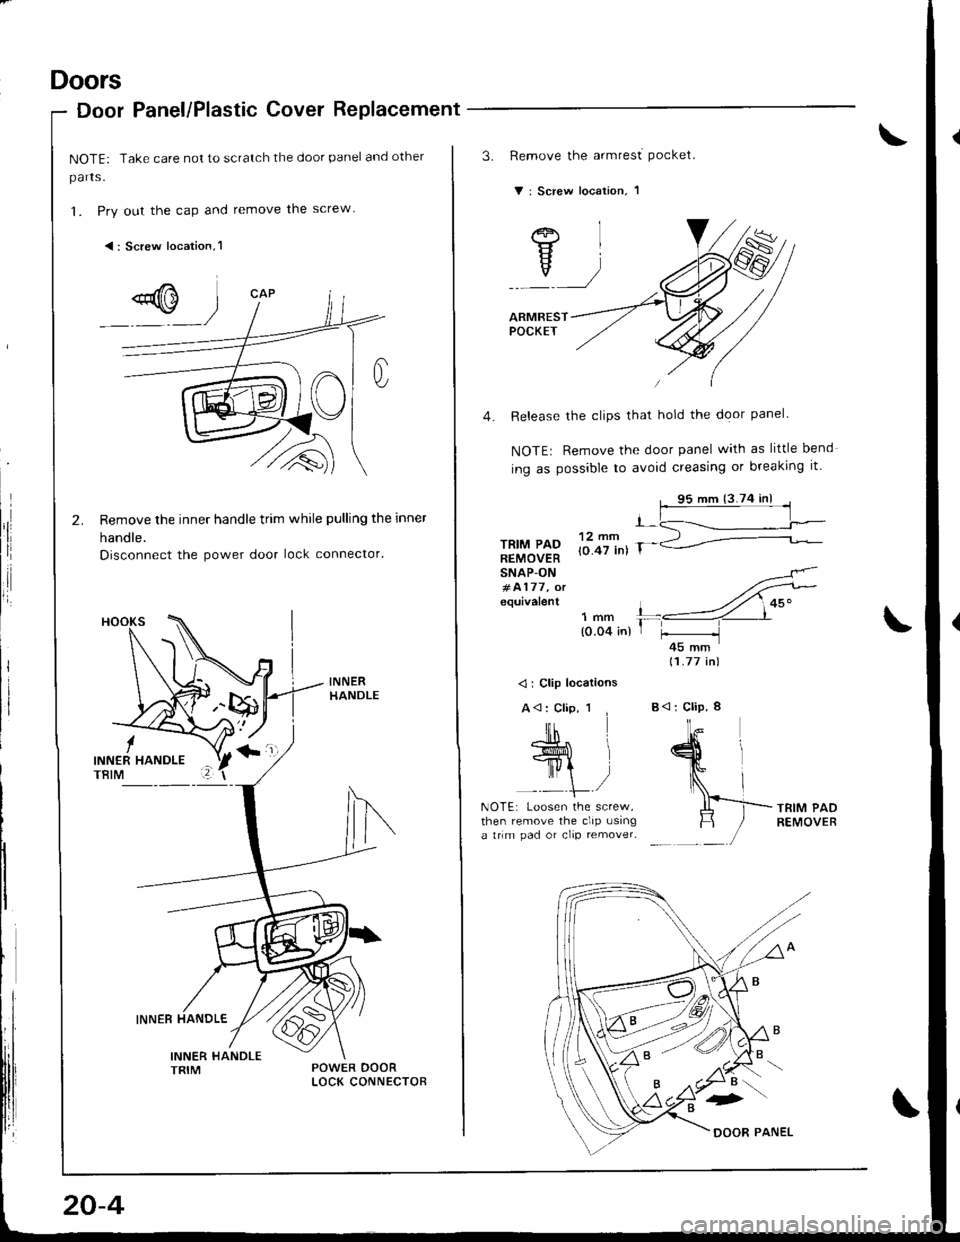 HONDA INTEGRA 1998 4.G Workshop Manual Doors
Door Panel/Plastic Cover Replacement
NOTE: Take care not to scratch the door panel and other
parts.
1. Pry out the cap and remove the screw
<: Screw location,l
Remove the inner handle trim while